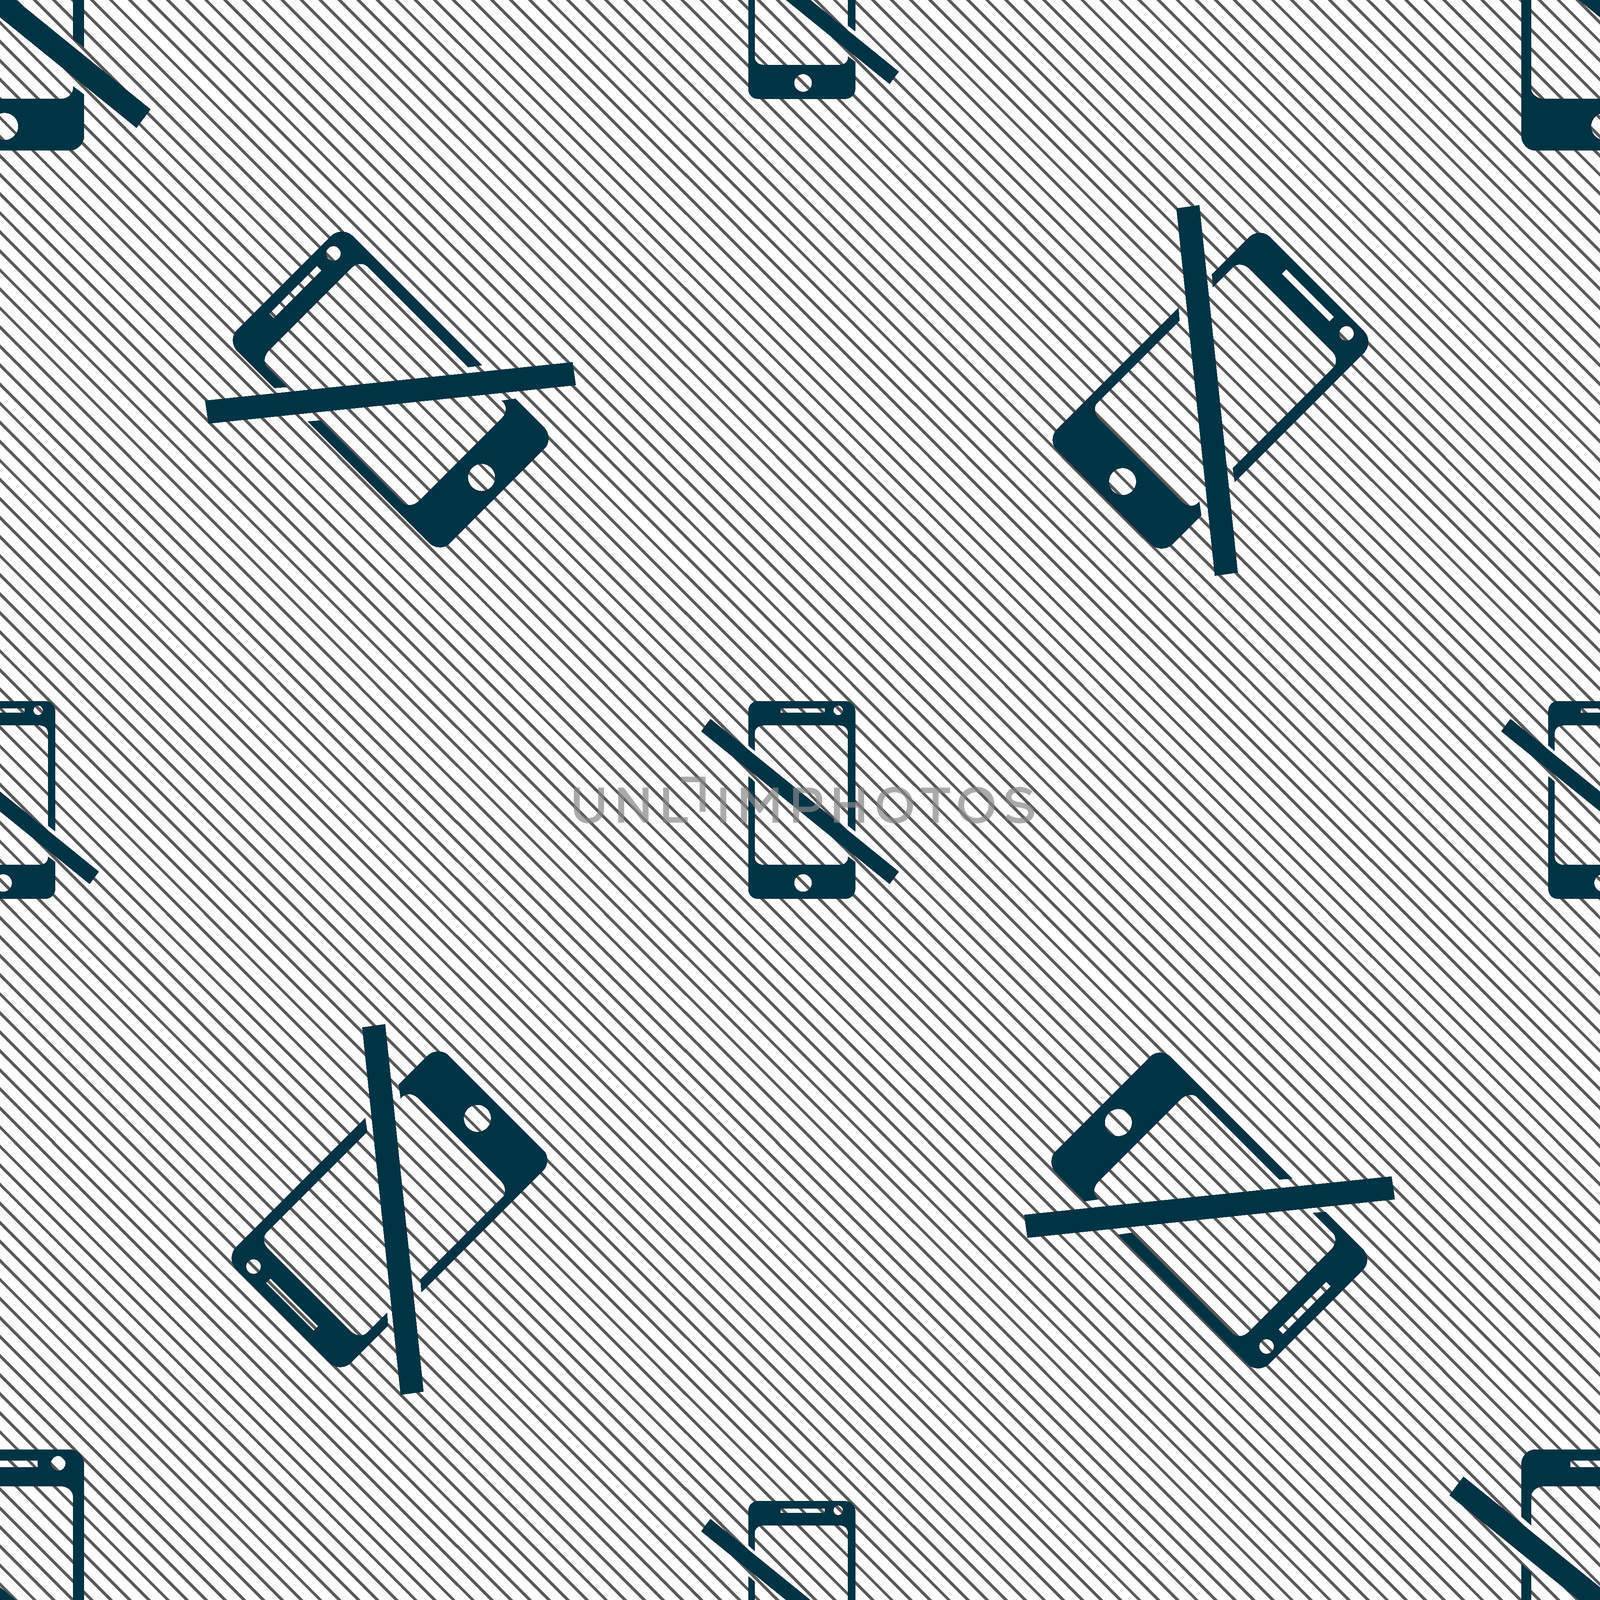 Do not call. Smartphone signs icon. Support symbol. Seamless pattern with geometric texture. illustration